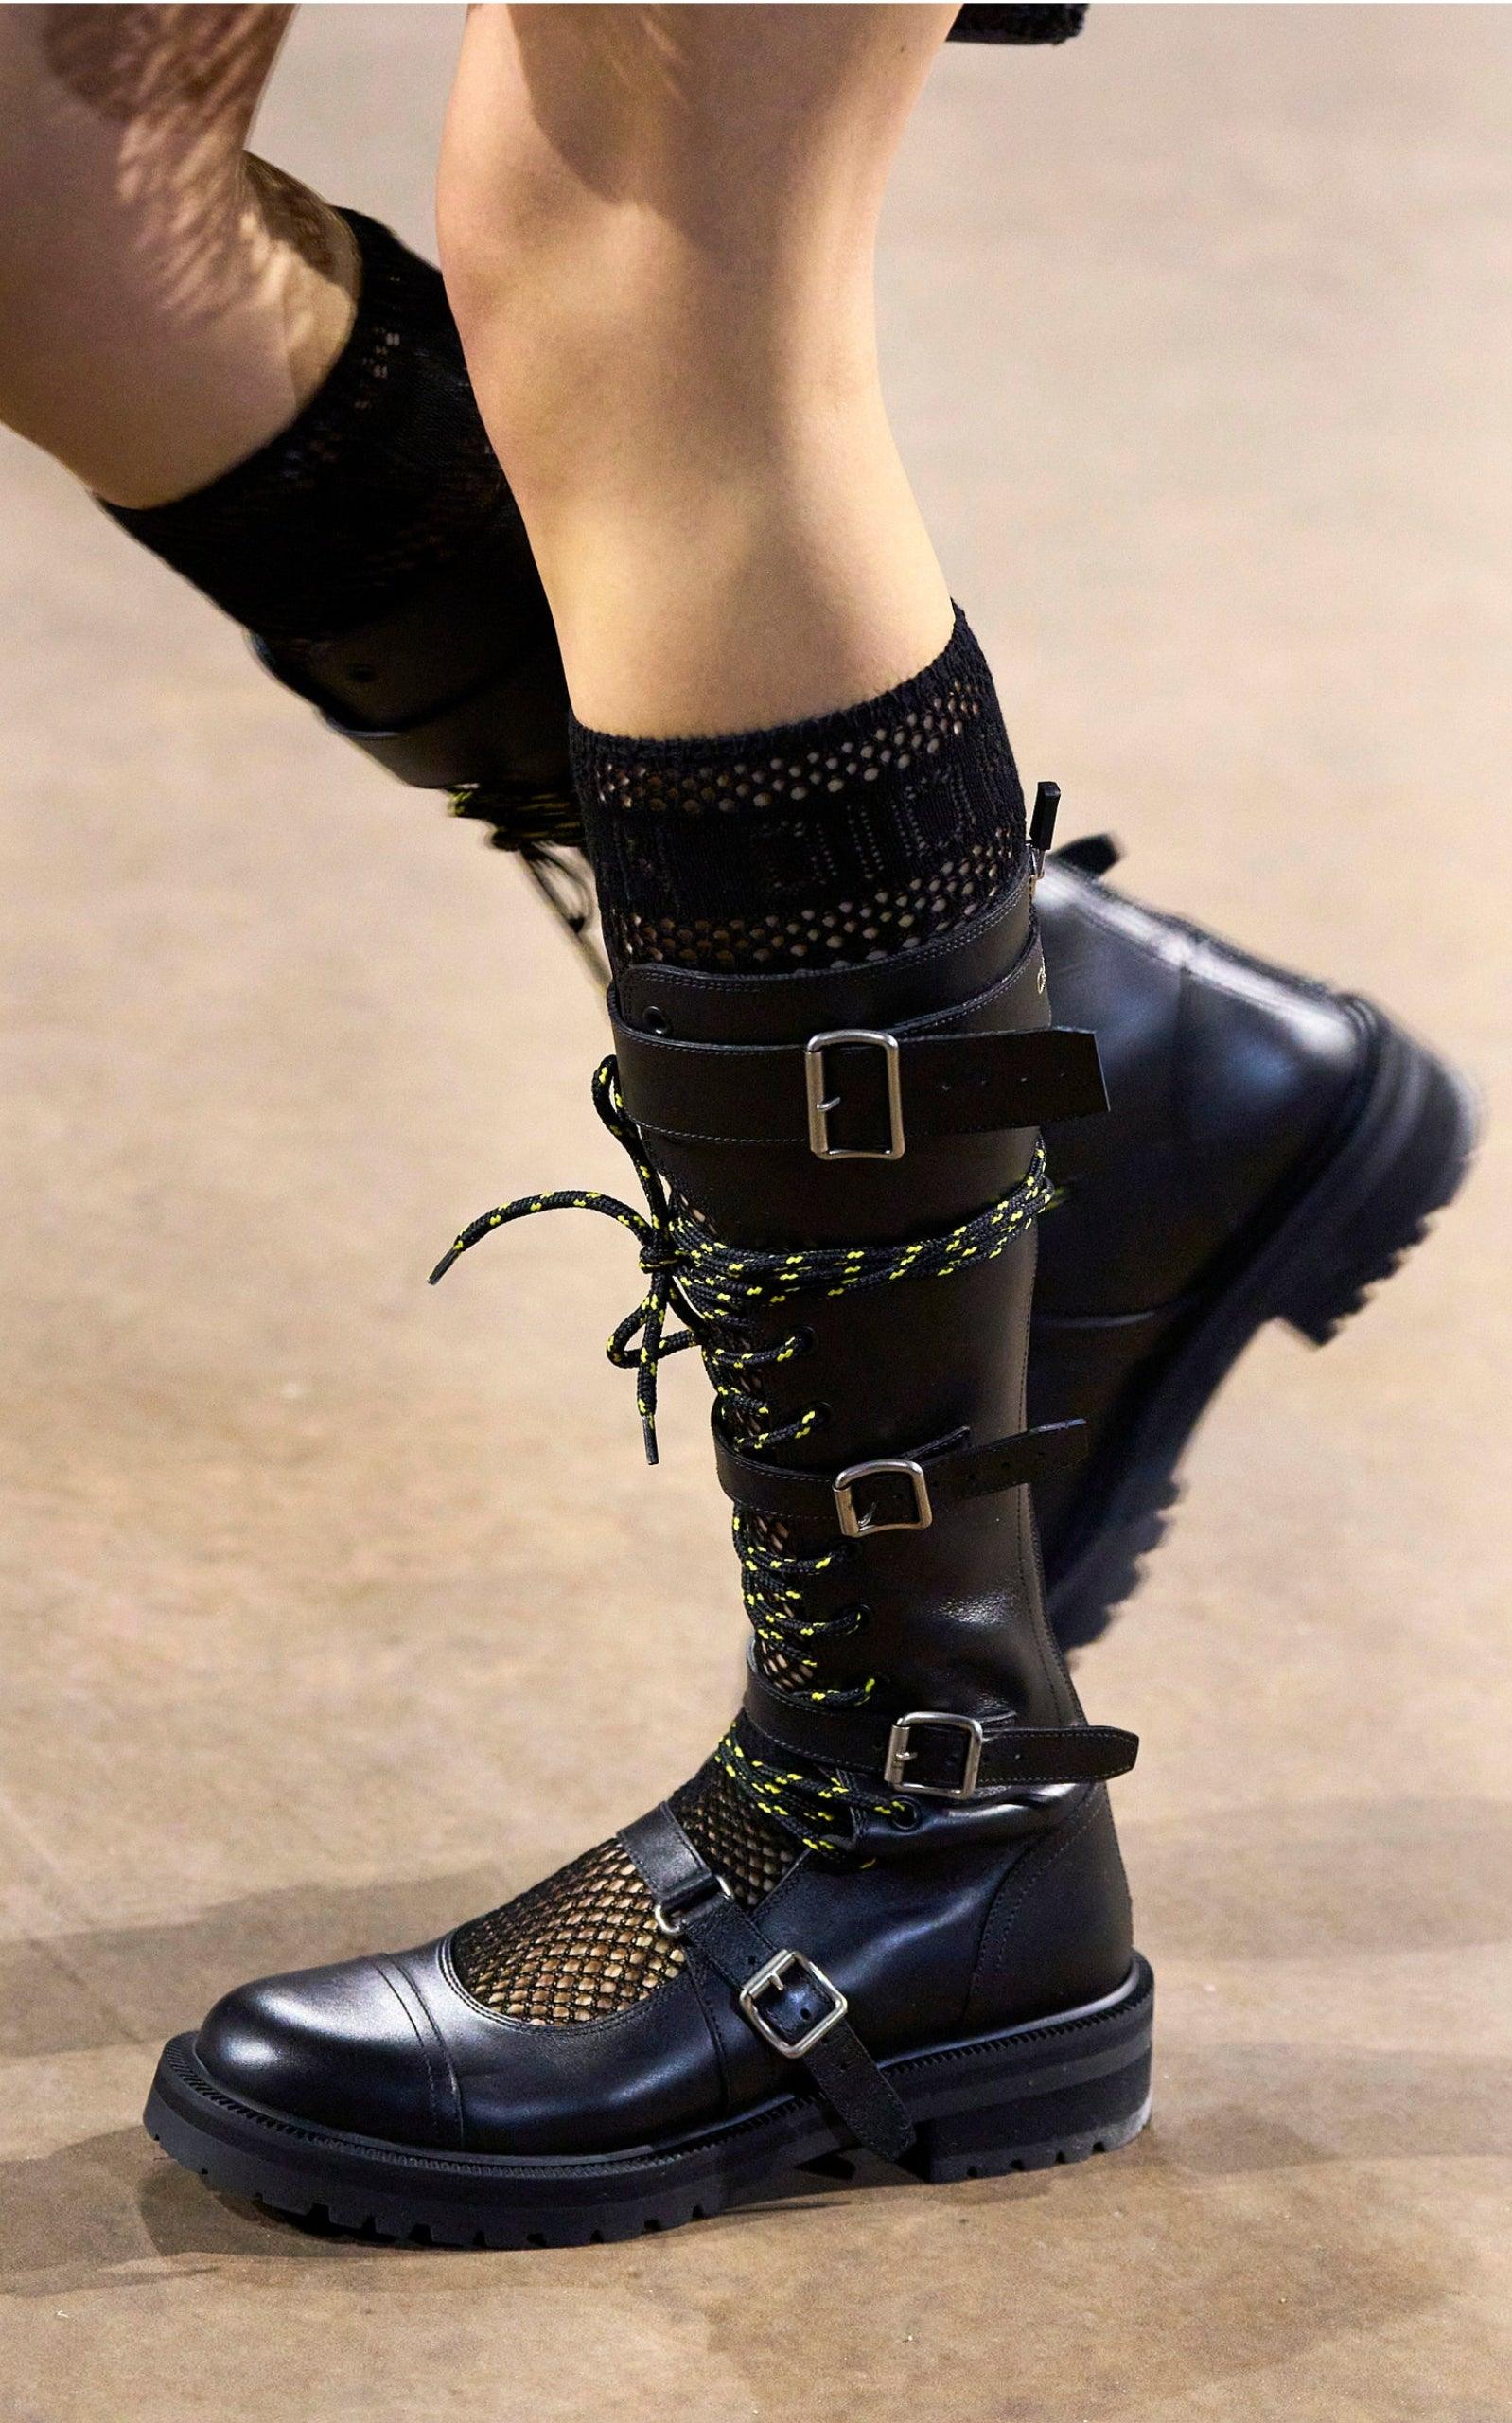 Dioranger Boots in Black Technical Fabric